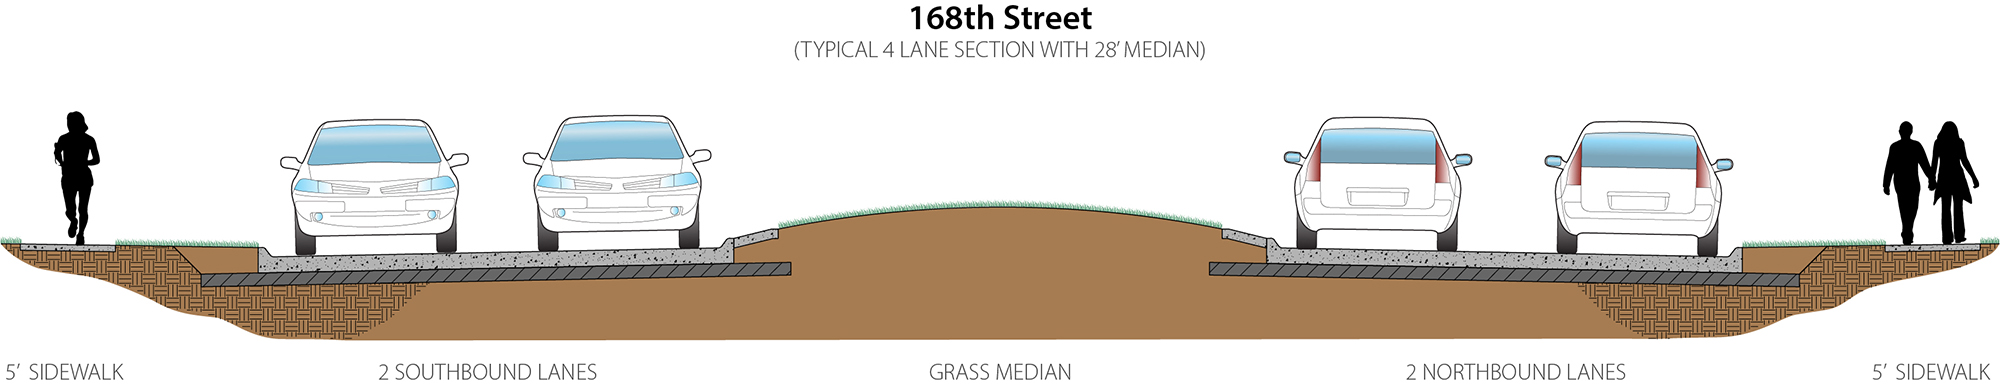 Typical 4 lane cross-section of road with a 28 foot median. Features a 5-foot sidewalk, 2 southbound lanes, a 28-foot grass median, 2 northbound lanes, and another 5-foot sidewalk.